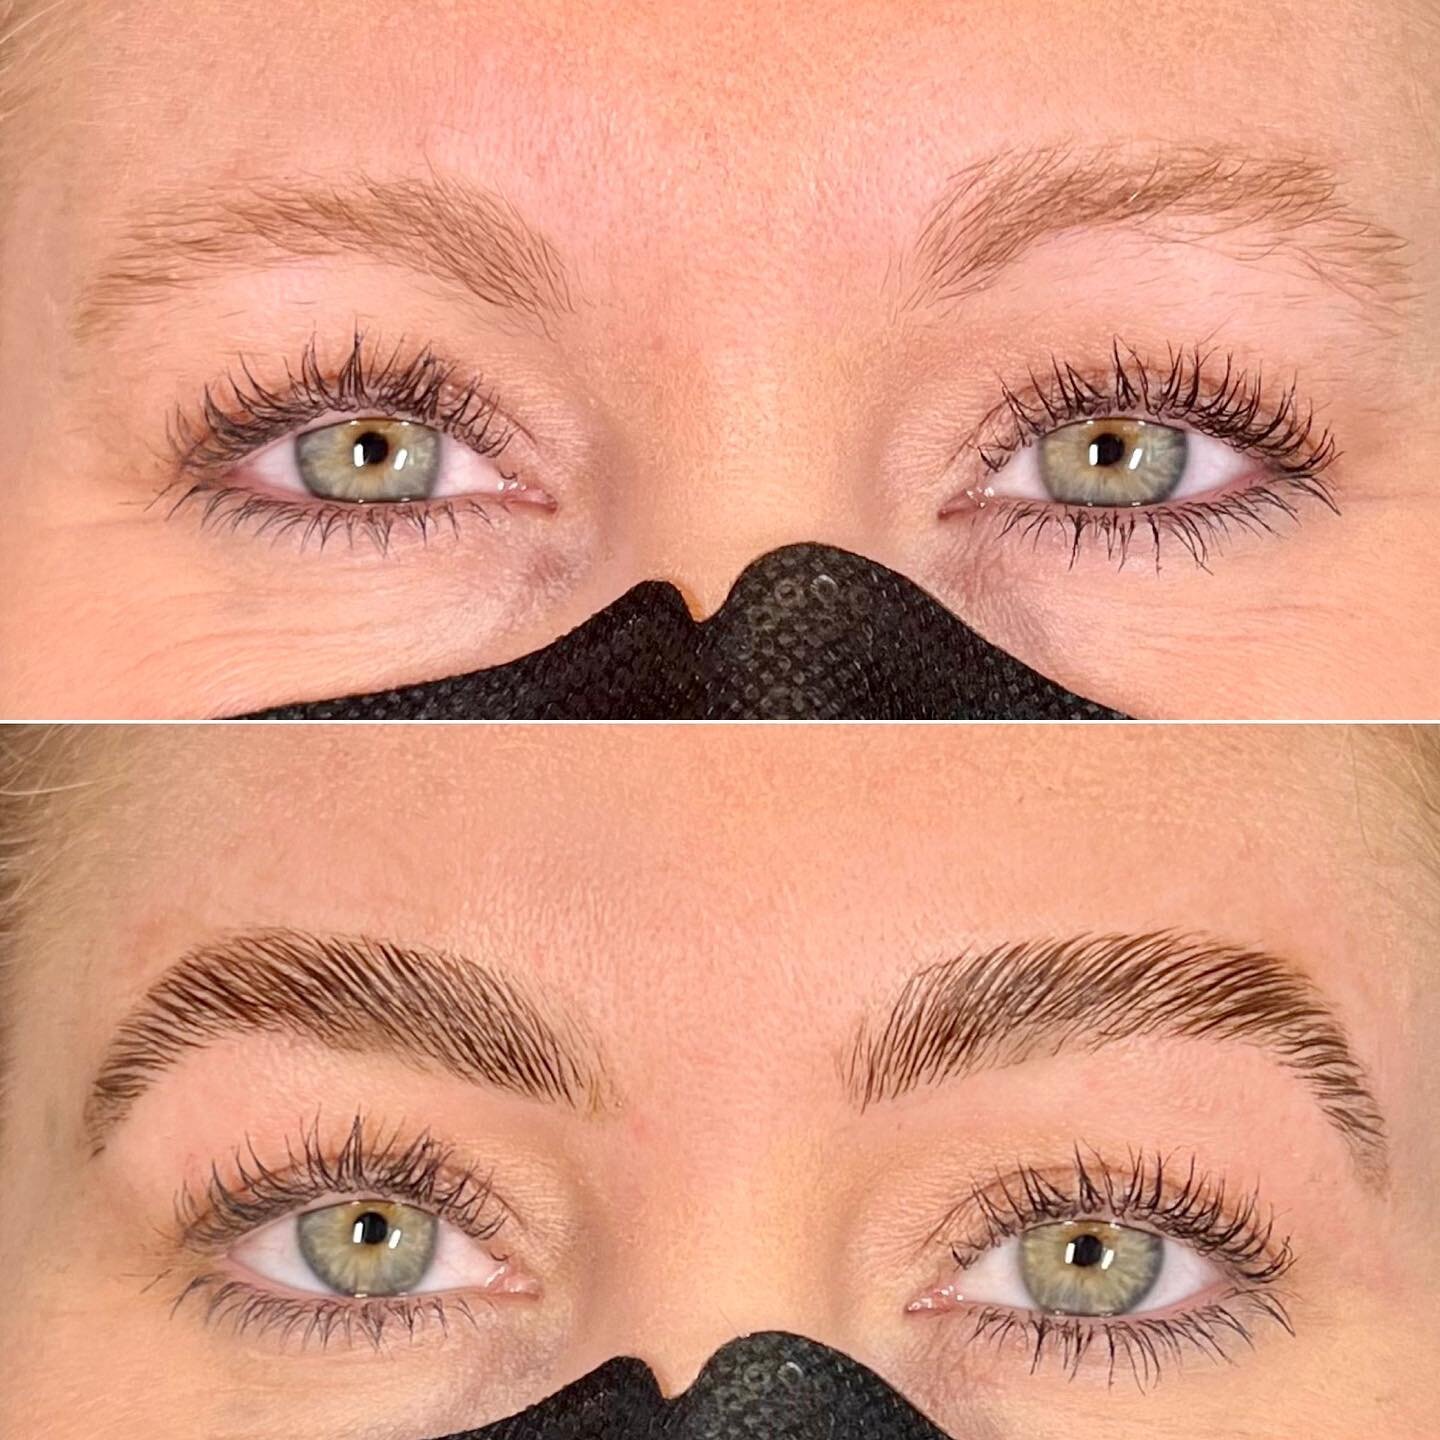 🤨Asymmetry - SOLVED✔️ Can you see in the before that one of her brows was literally higher on her face than the other?  While we can&rsquo;t actually move the brows on the face, with lamination, shape, and tint, we can manipulate the hair in ways to